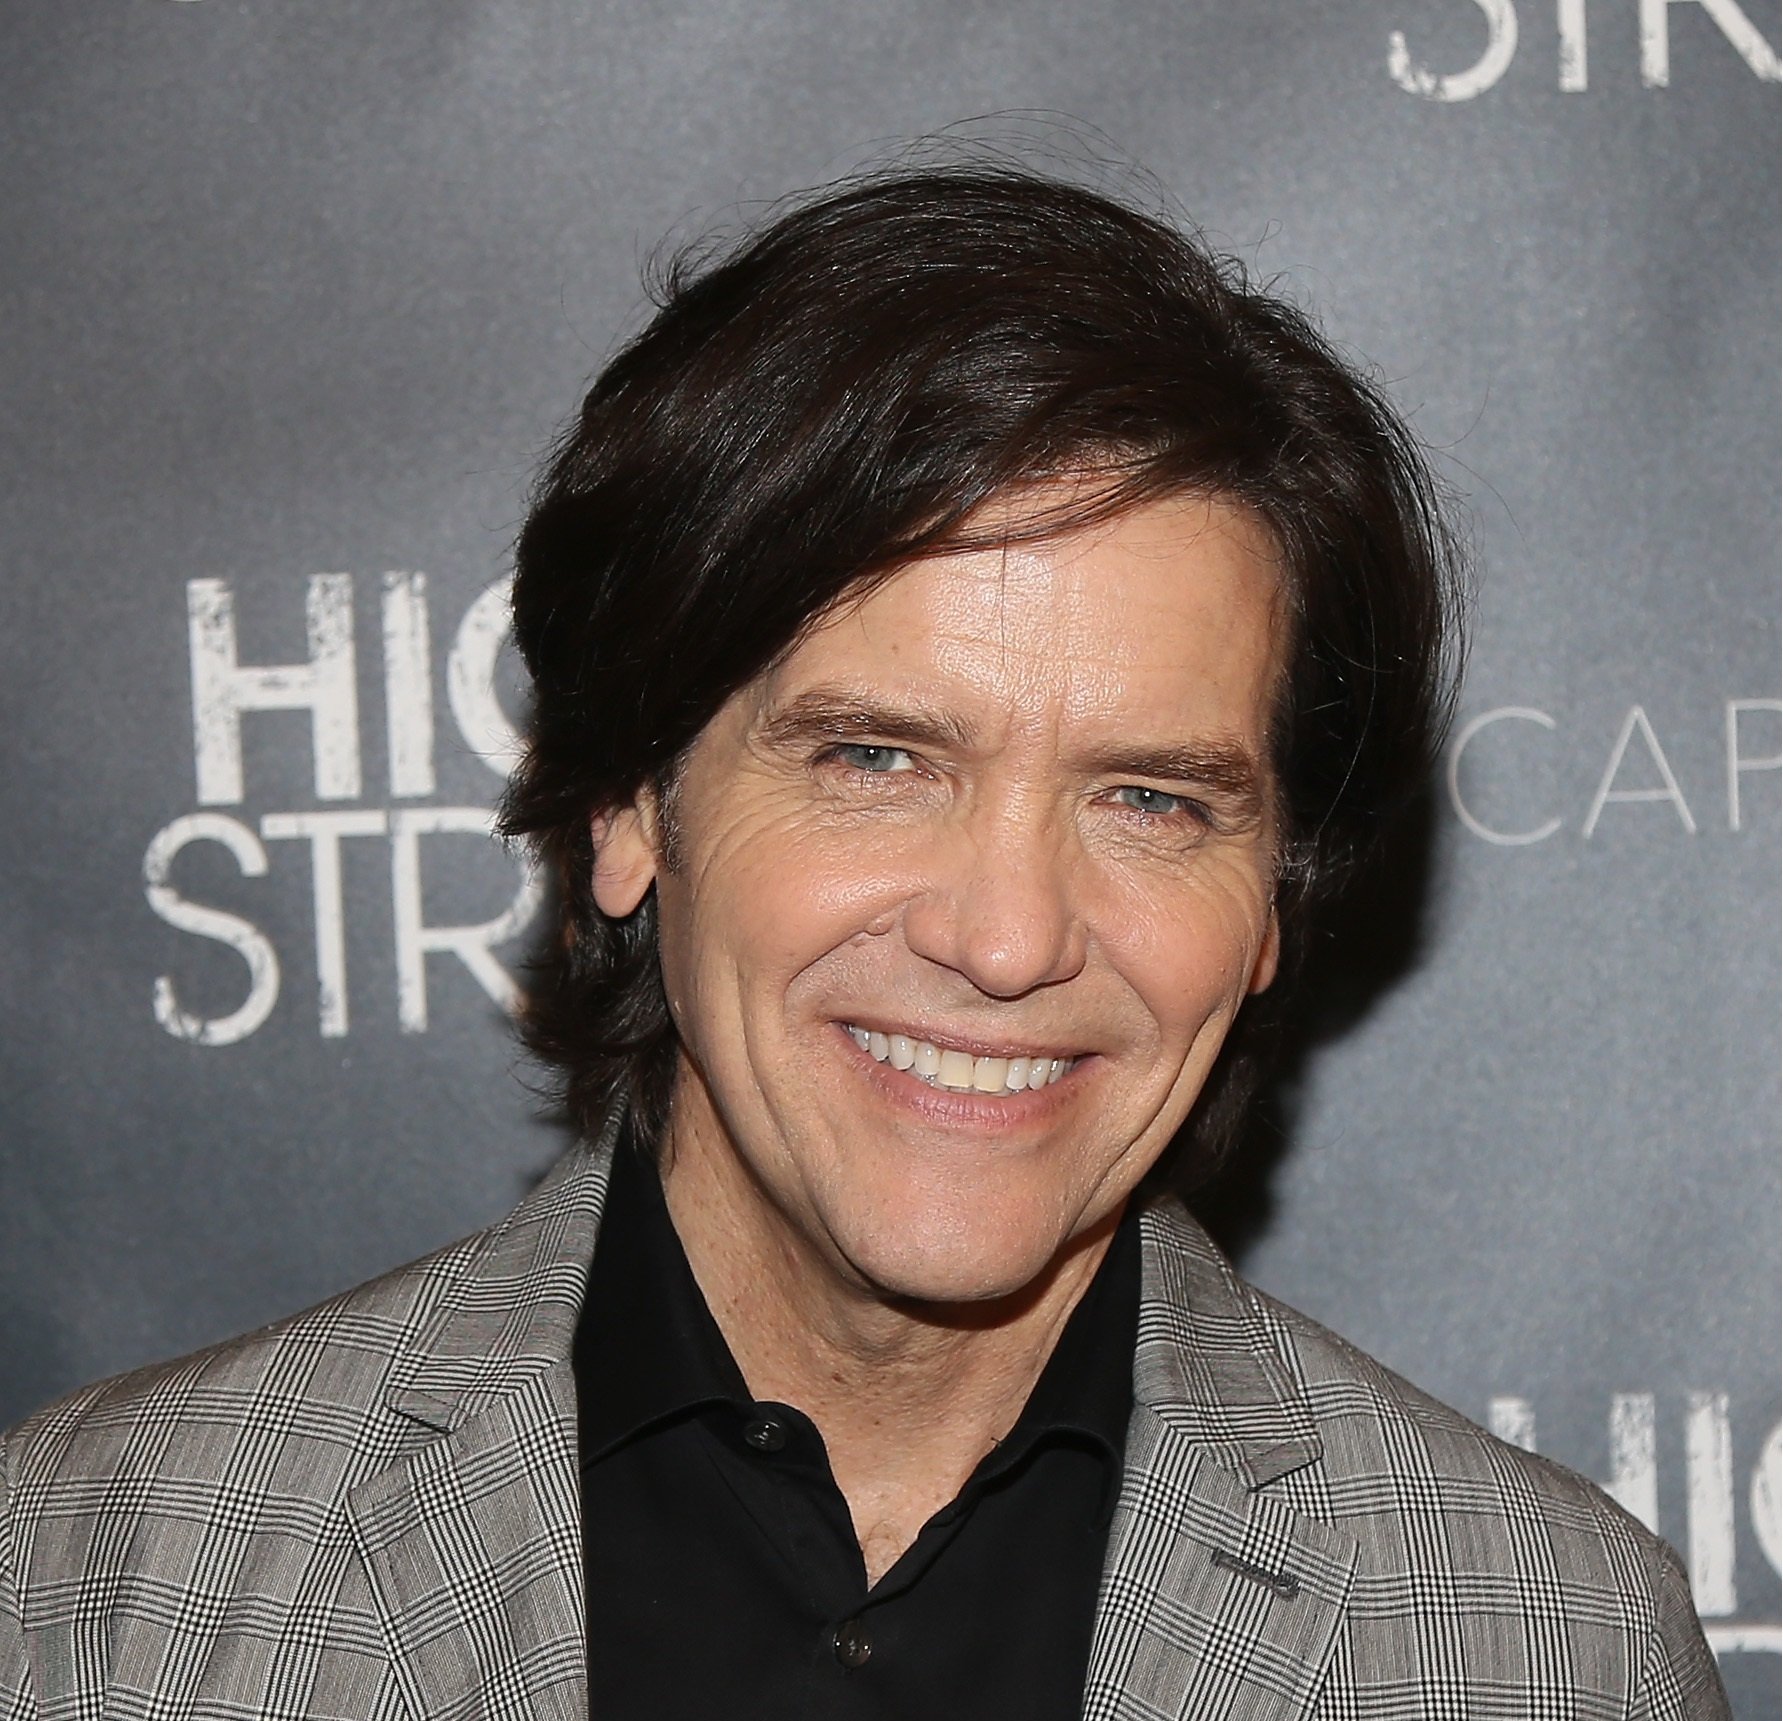 'The Young and the Restless' star Michael Damian wearing a grey suit and black shirt.